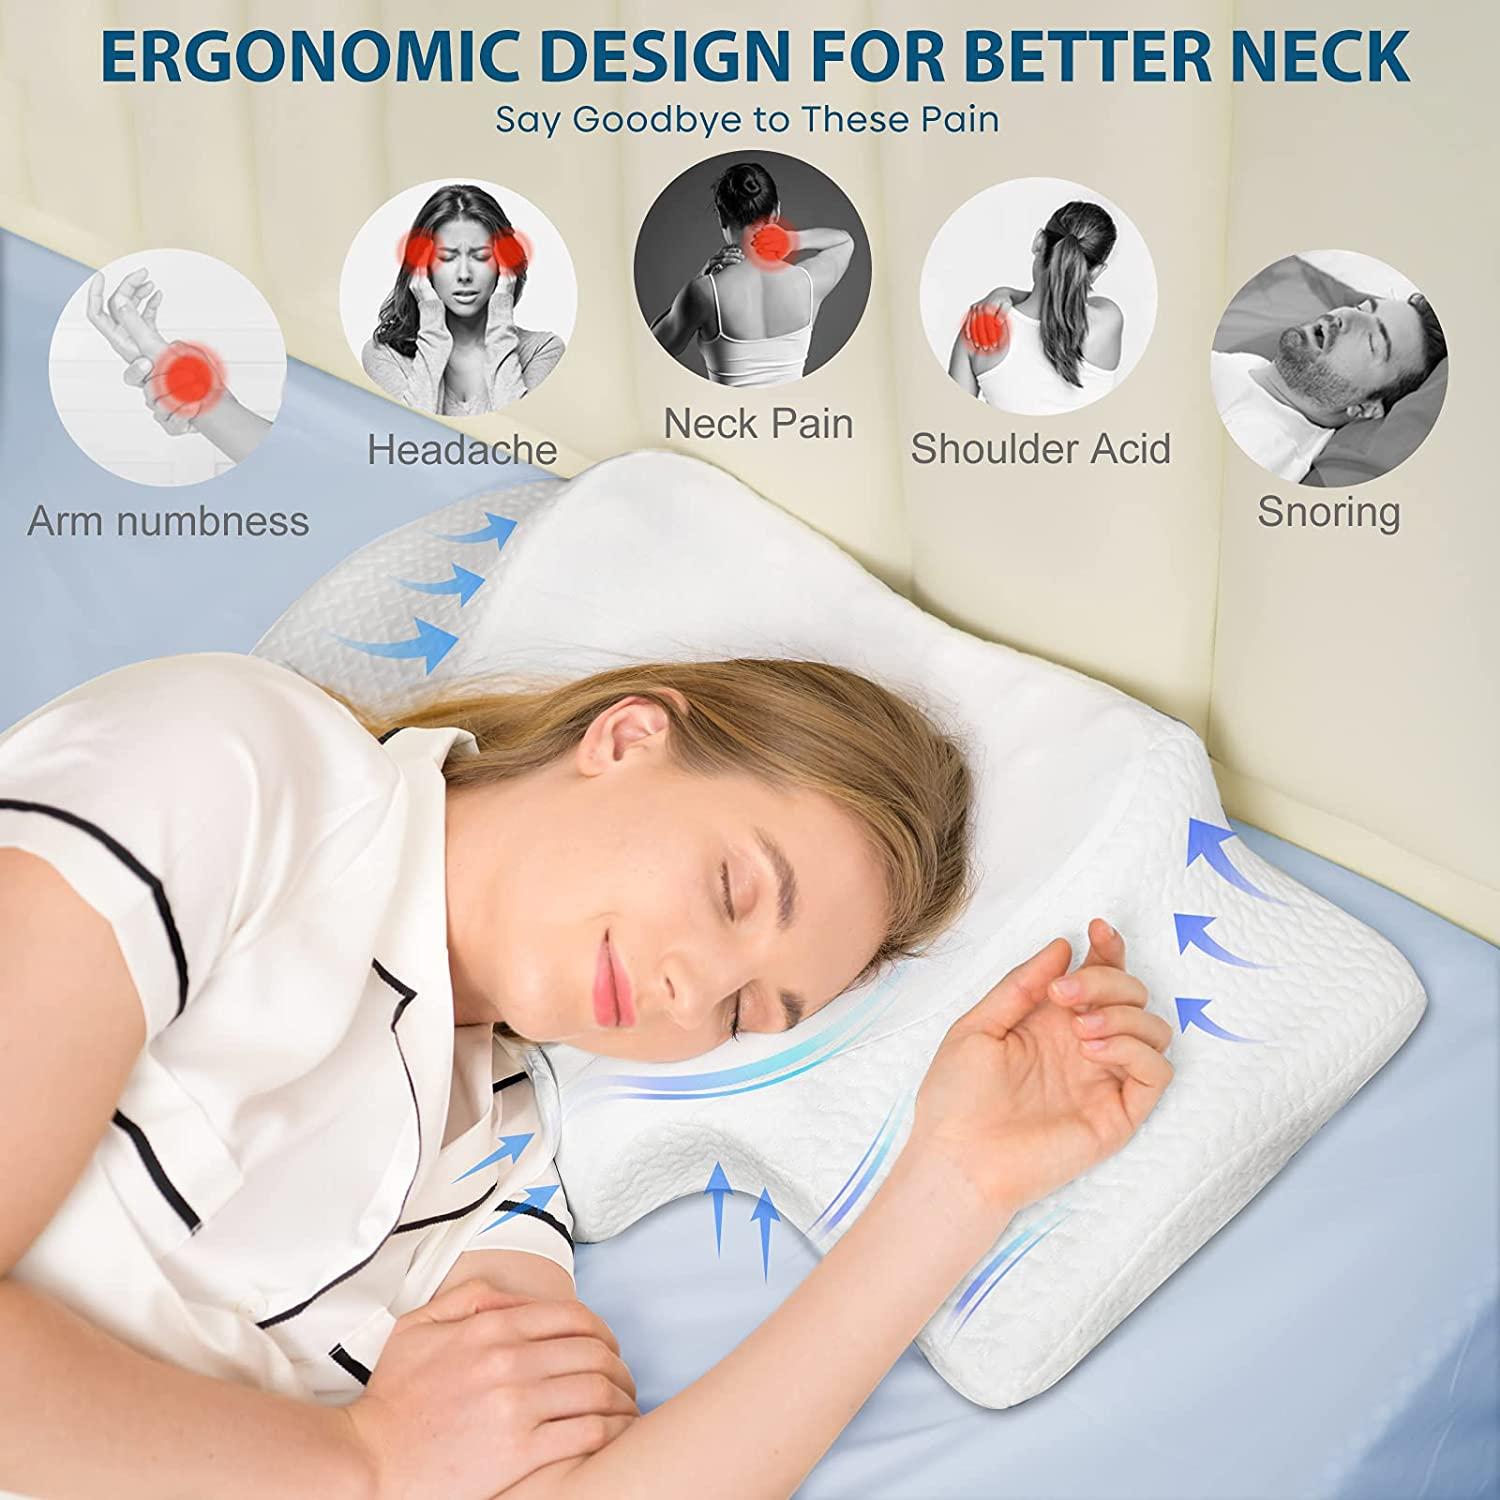 Neck Pillow Memory Foam Pillows - Ergonomic Pillow For Neck Shoulder Pain  Relief Bed Pillow For Sleeping Orthopedic Cervical Pillow Support For Side